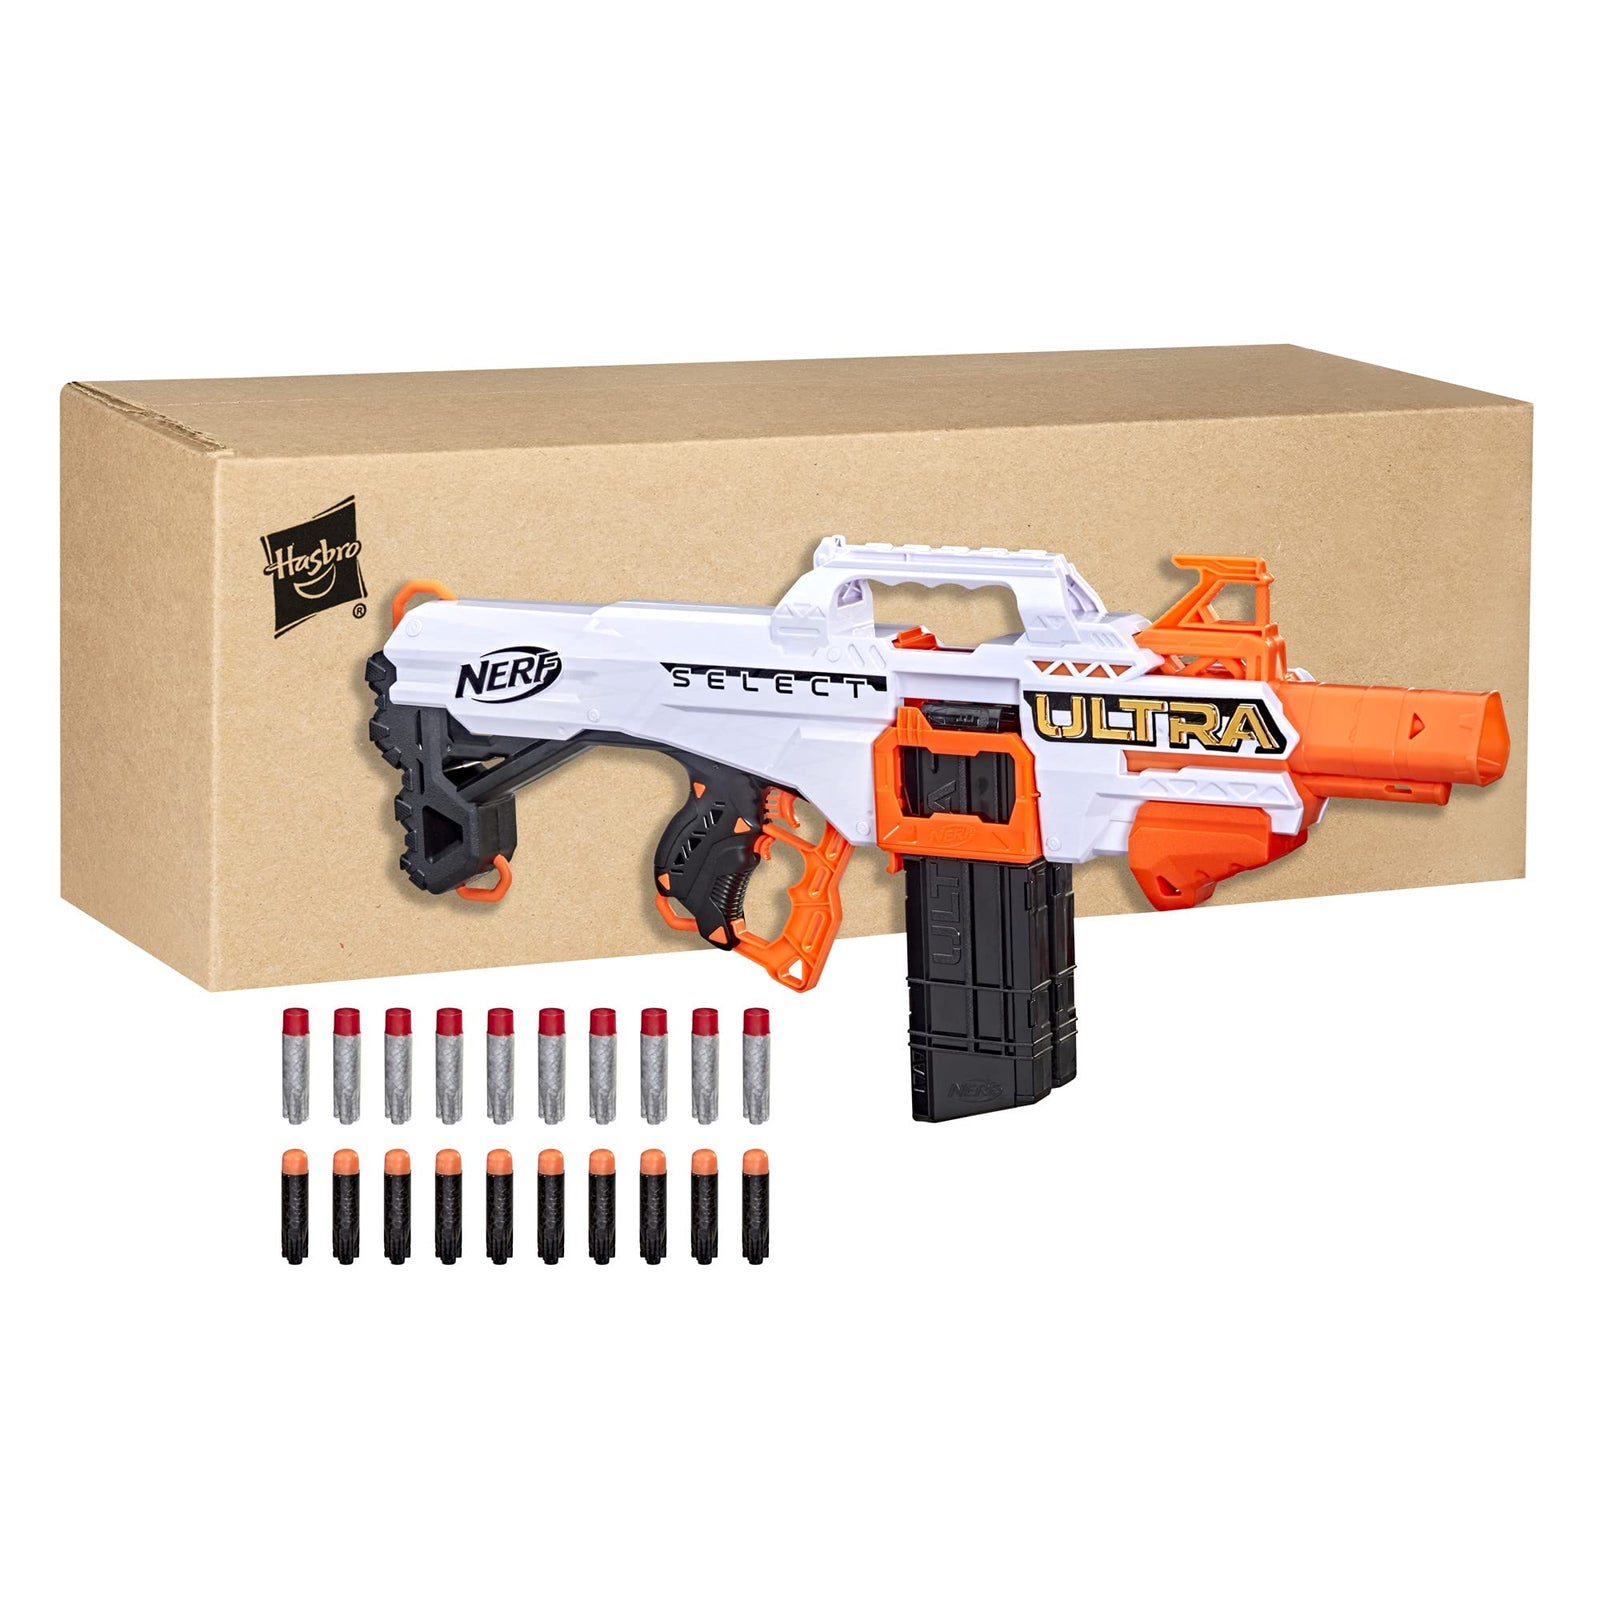 NERF Ultra Select Fully Motorized Blaster, Fire for Distance or Accuracy, Includes Clips and Darts, Compatible Only Ultra Darts